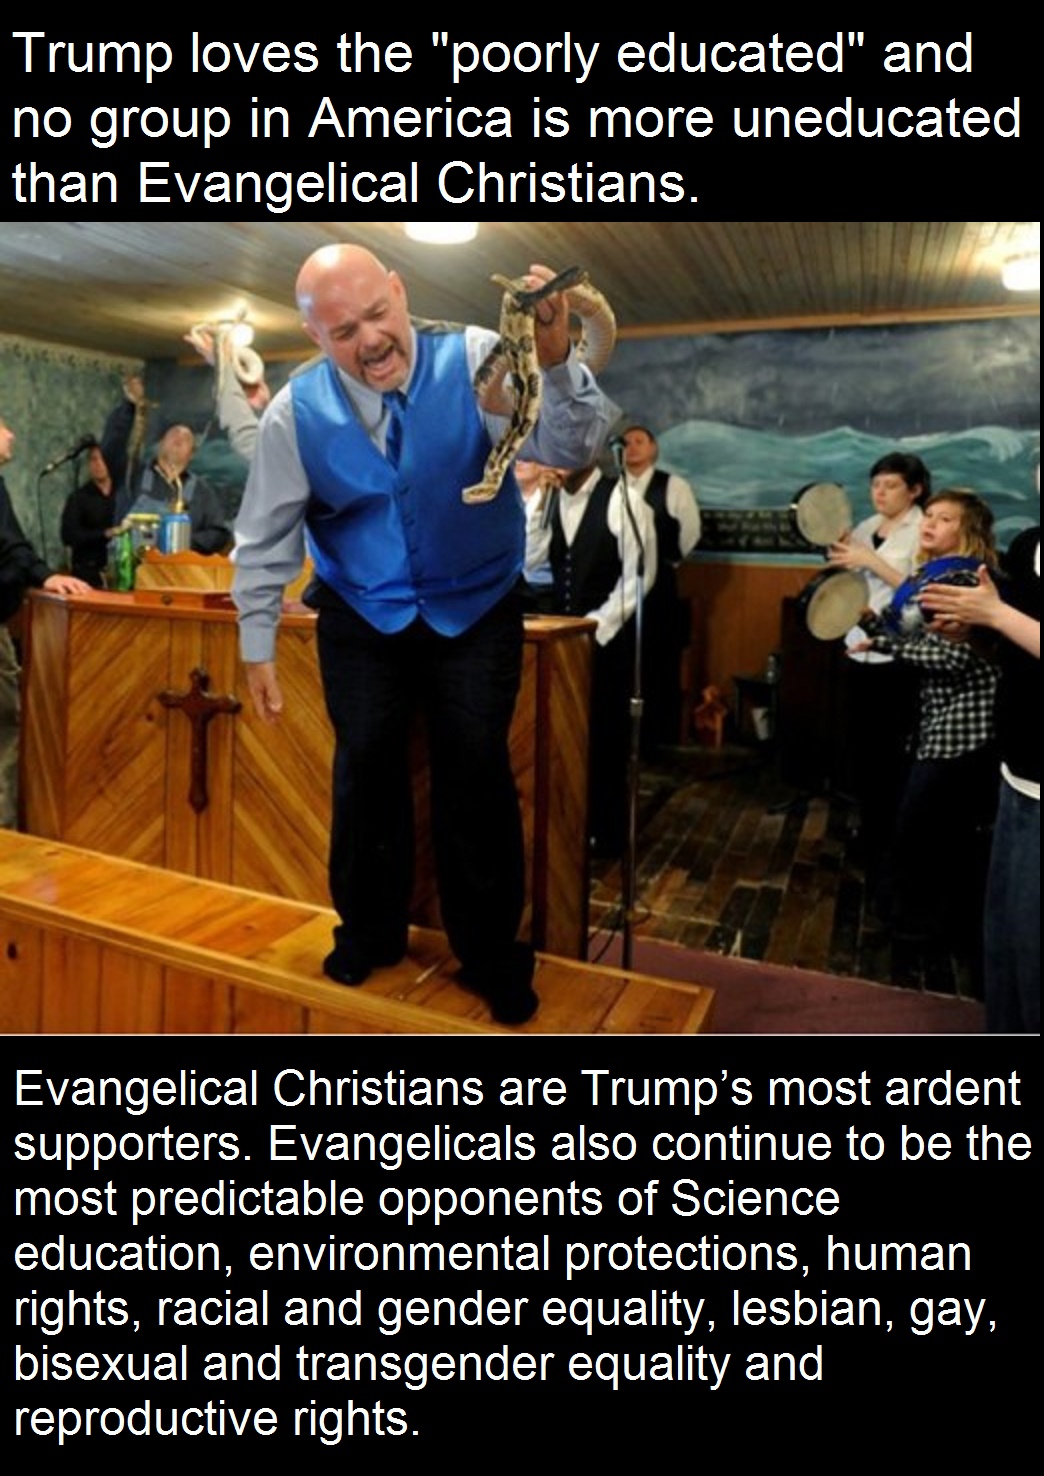 Evangelical Christians are Trump’s most ardent supporters. Evangelicals also continue to be the most predictable opponents of Science education, environmental protections, human rights, racial and gender equality, lesbian, gay, bisexual and transgender equality and reproductive rights.  